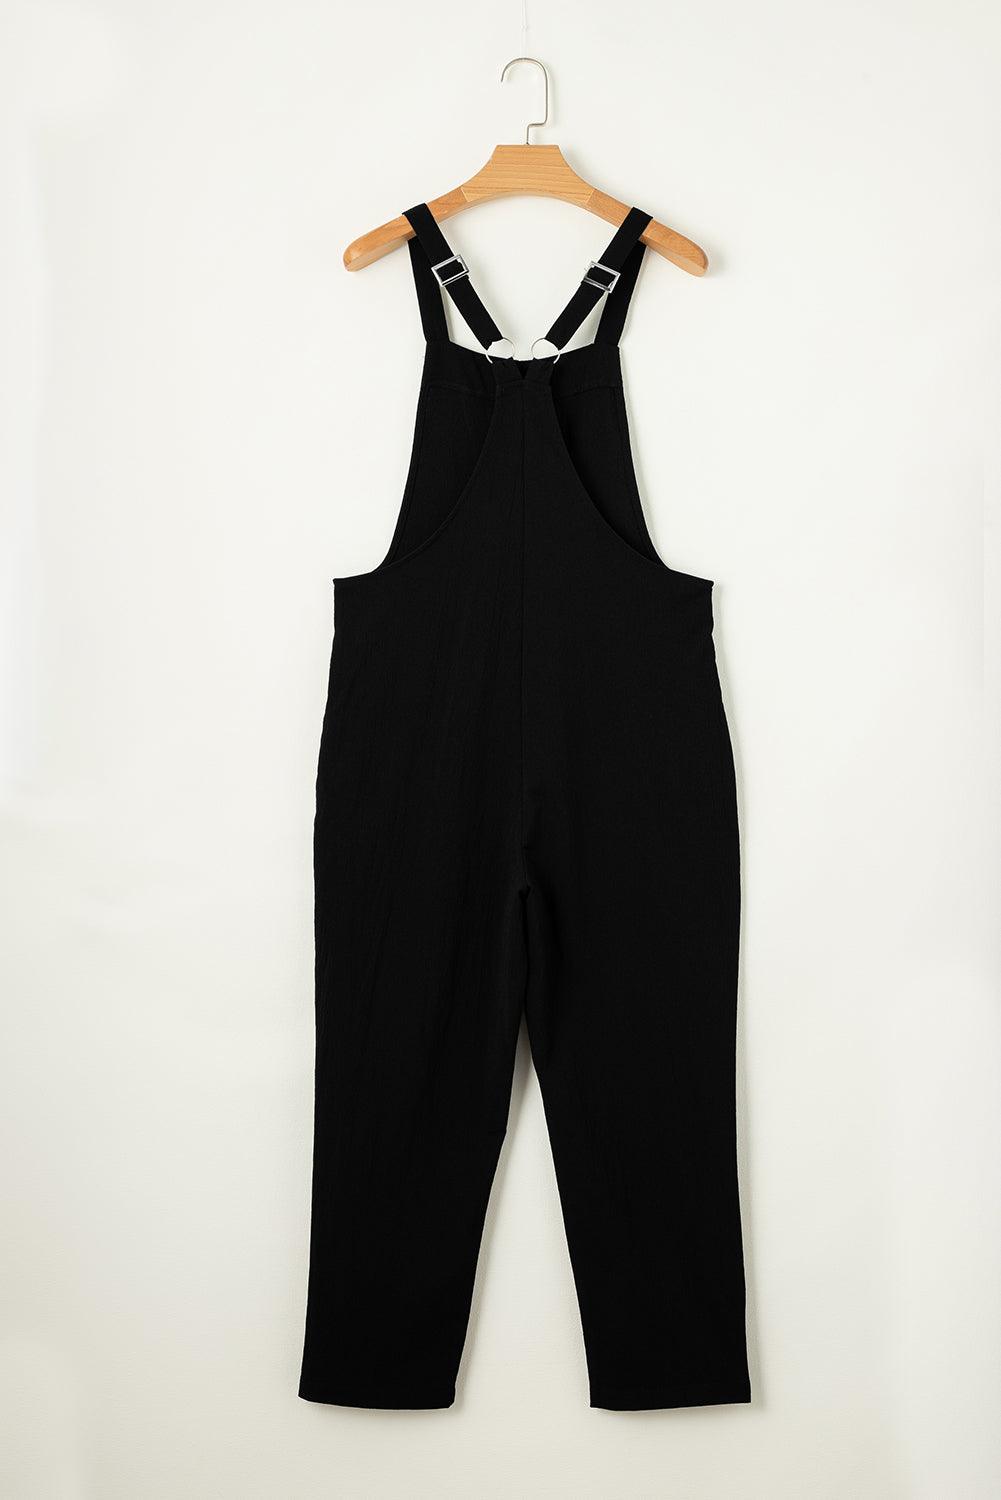 Black Adjustable Buckle Straps Cropped Casual Overalls Jumpsuit